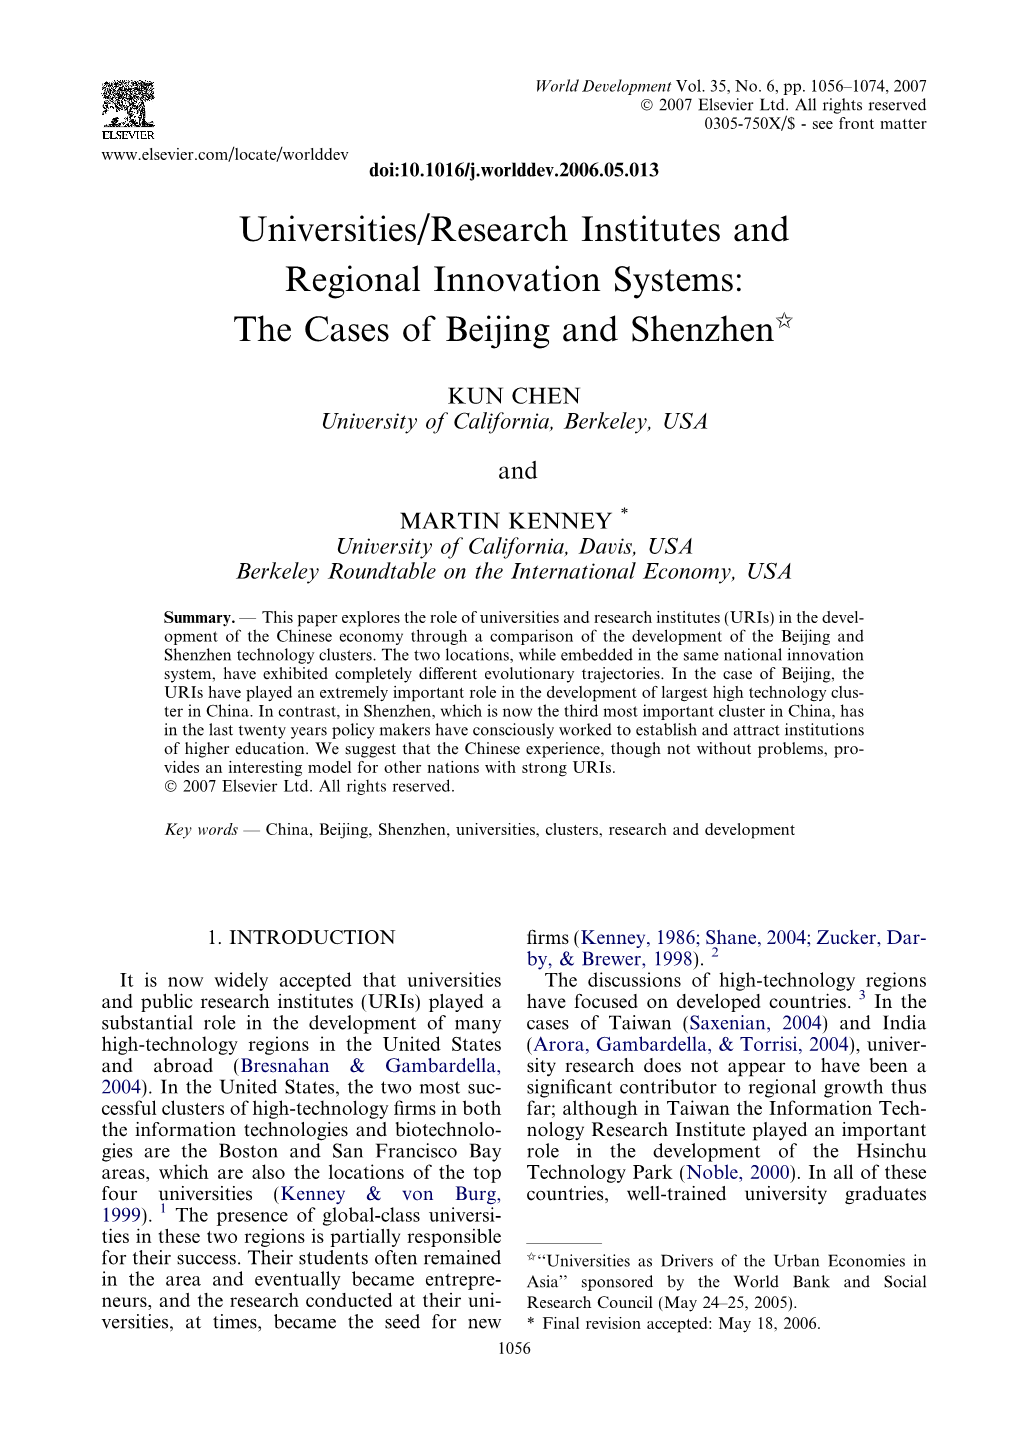 Universities/Research Institutes and Regional Innovation Systems: the Cases of Beijing and Shenzheni